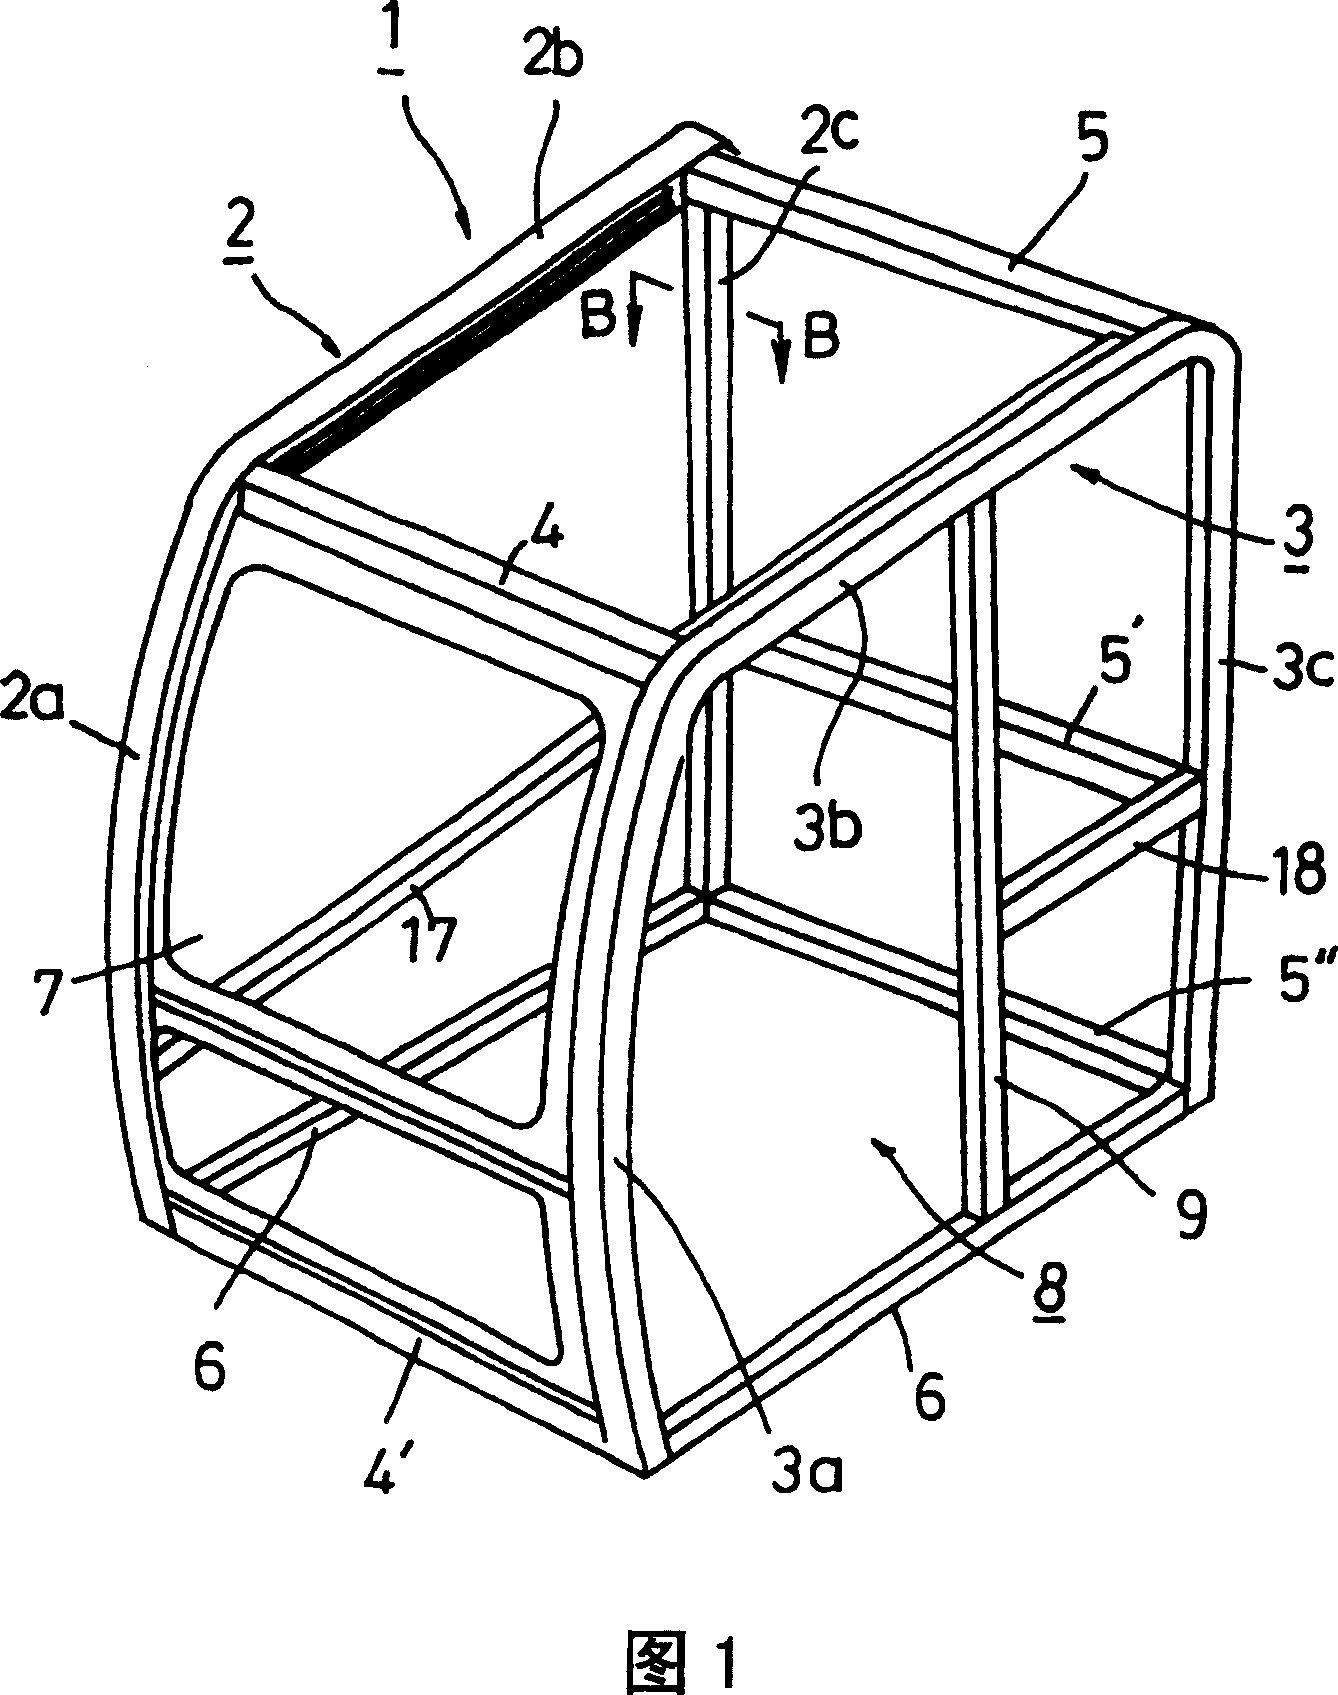 Driver's cab structure for load-carrying vehicle